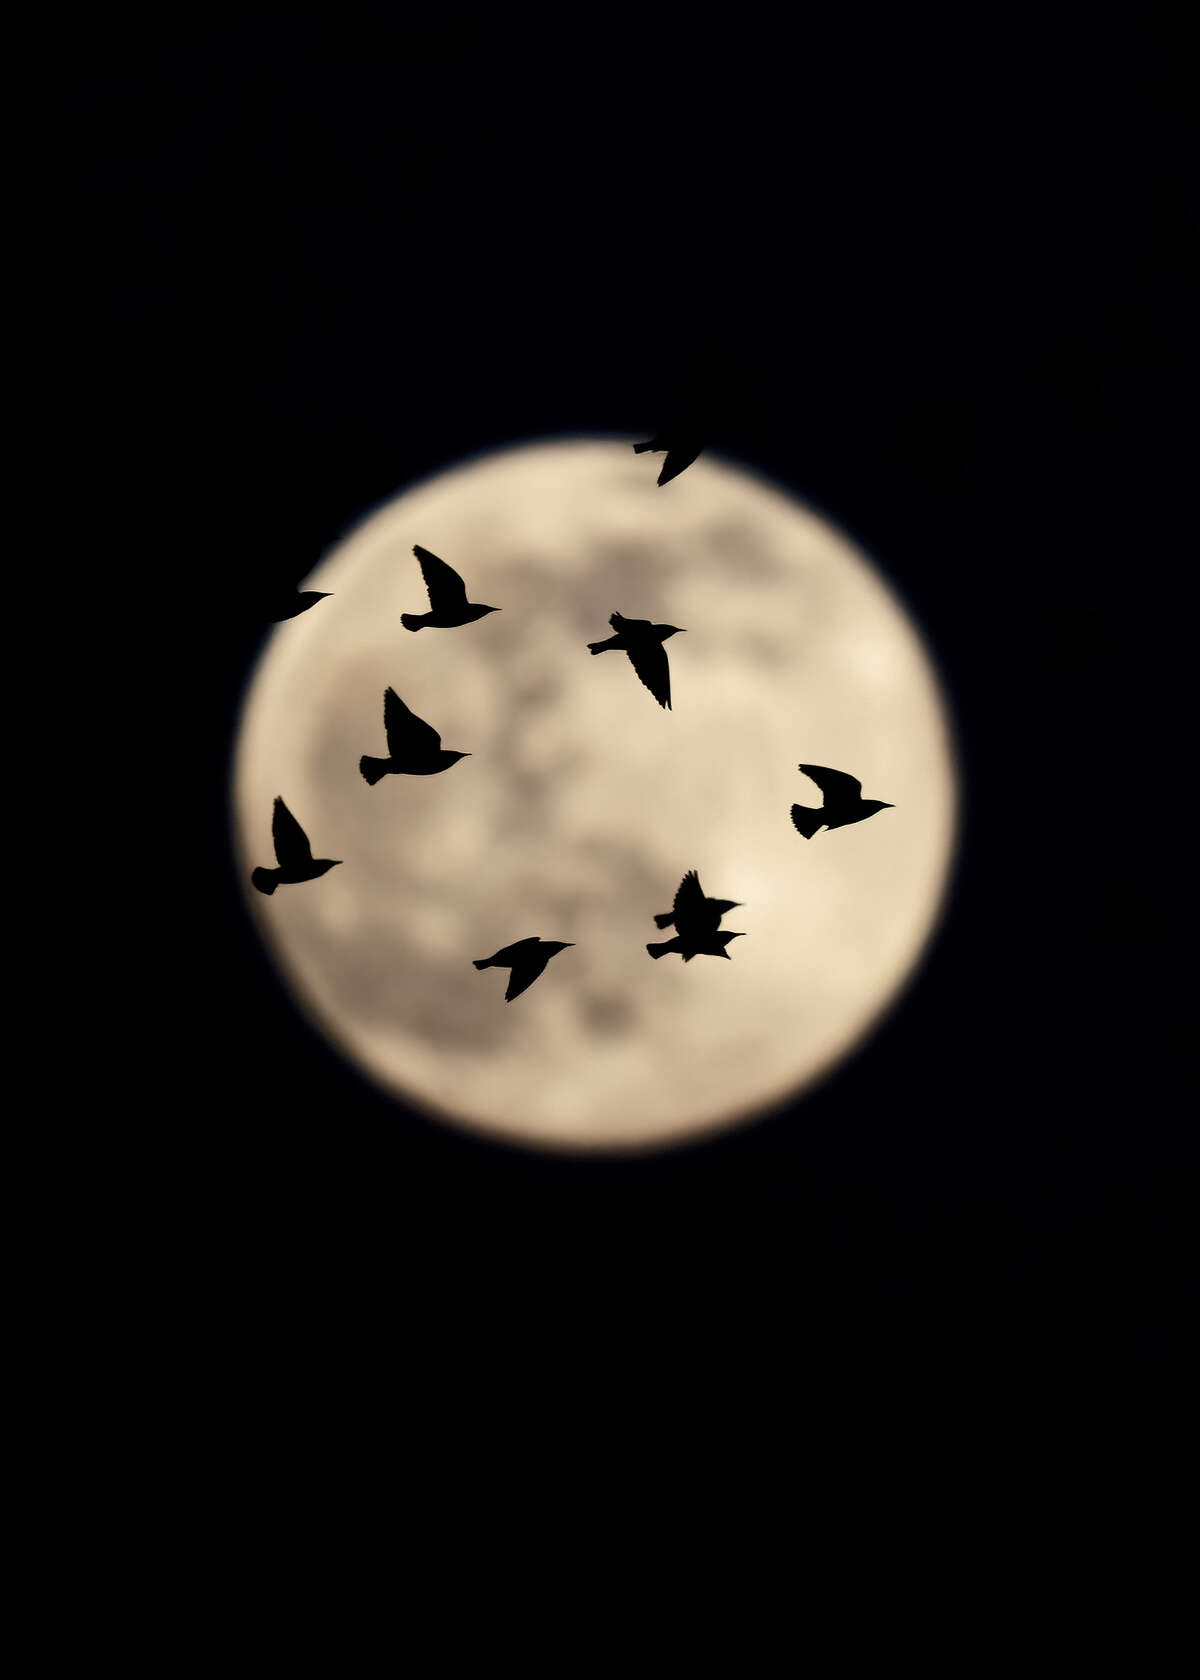 Starlings against the moon